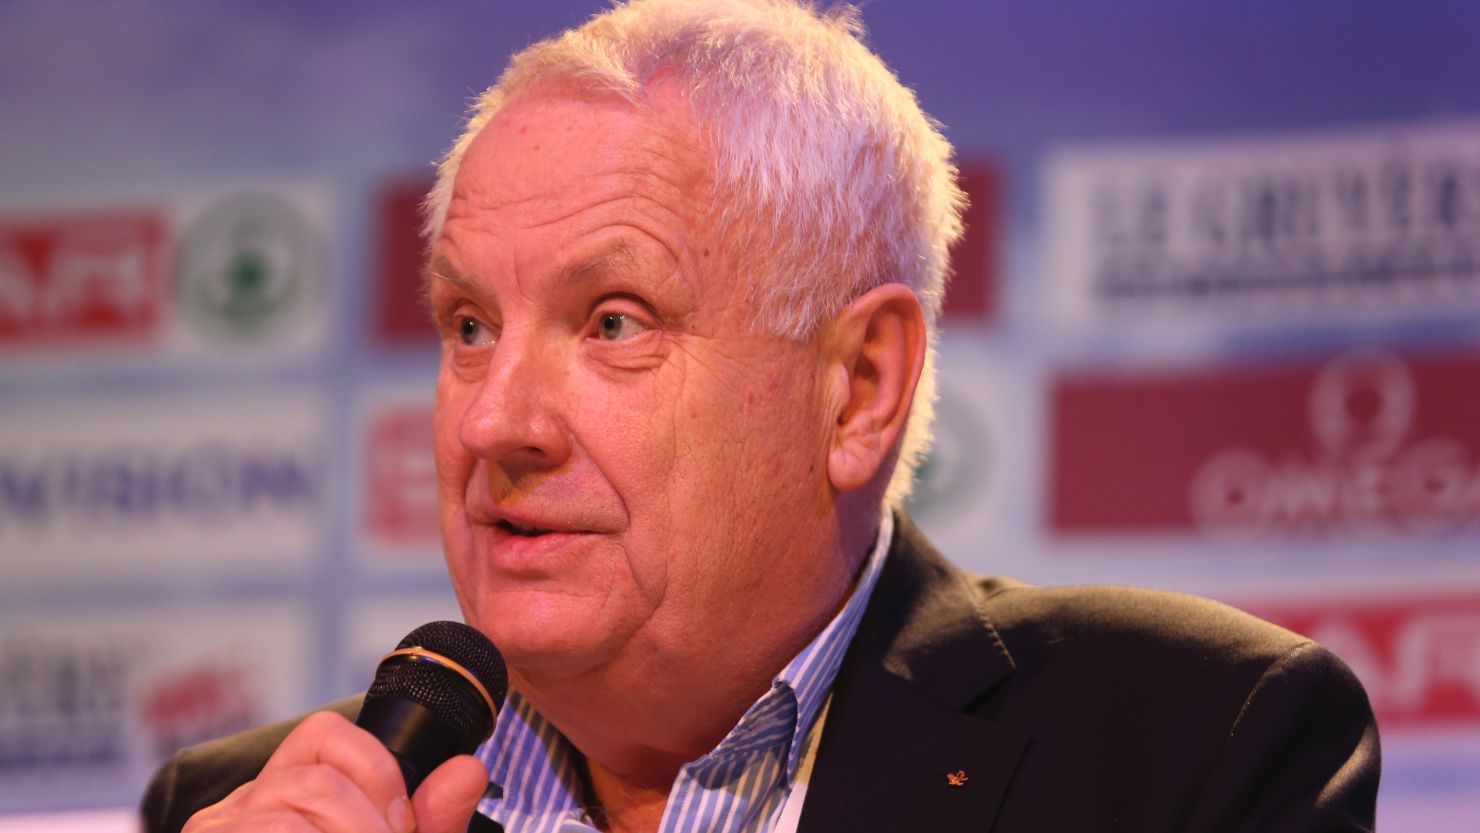 European Athletics president Svein Arne Hansen at a press conference ahead of the Spar European Cross Country Championships on December 12, 2015 in Hyeres, France.